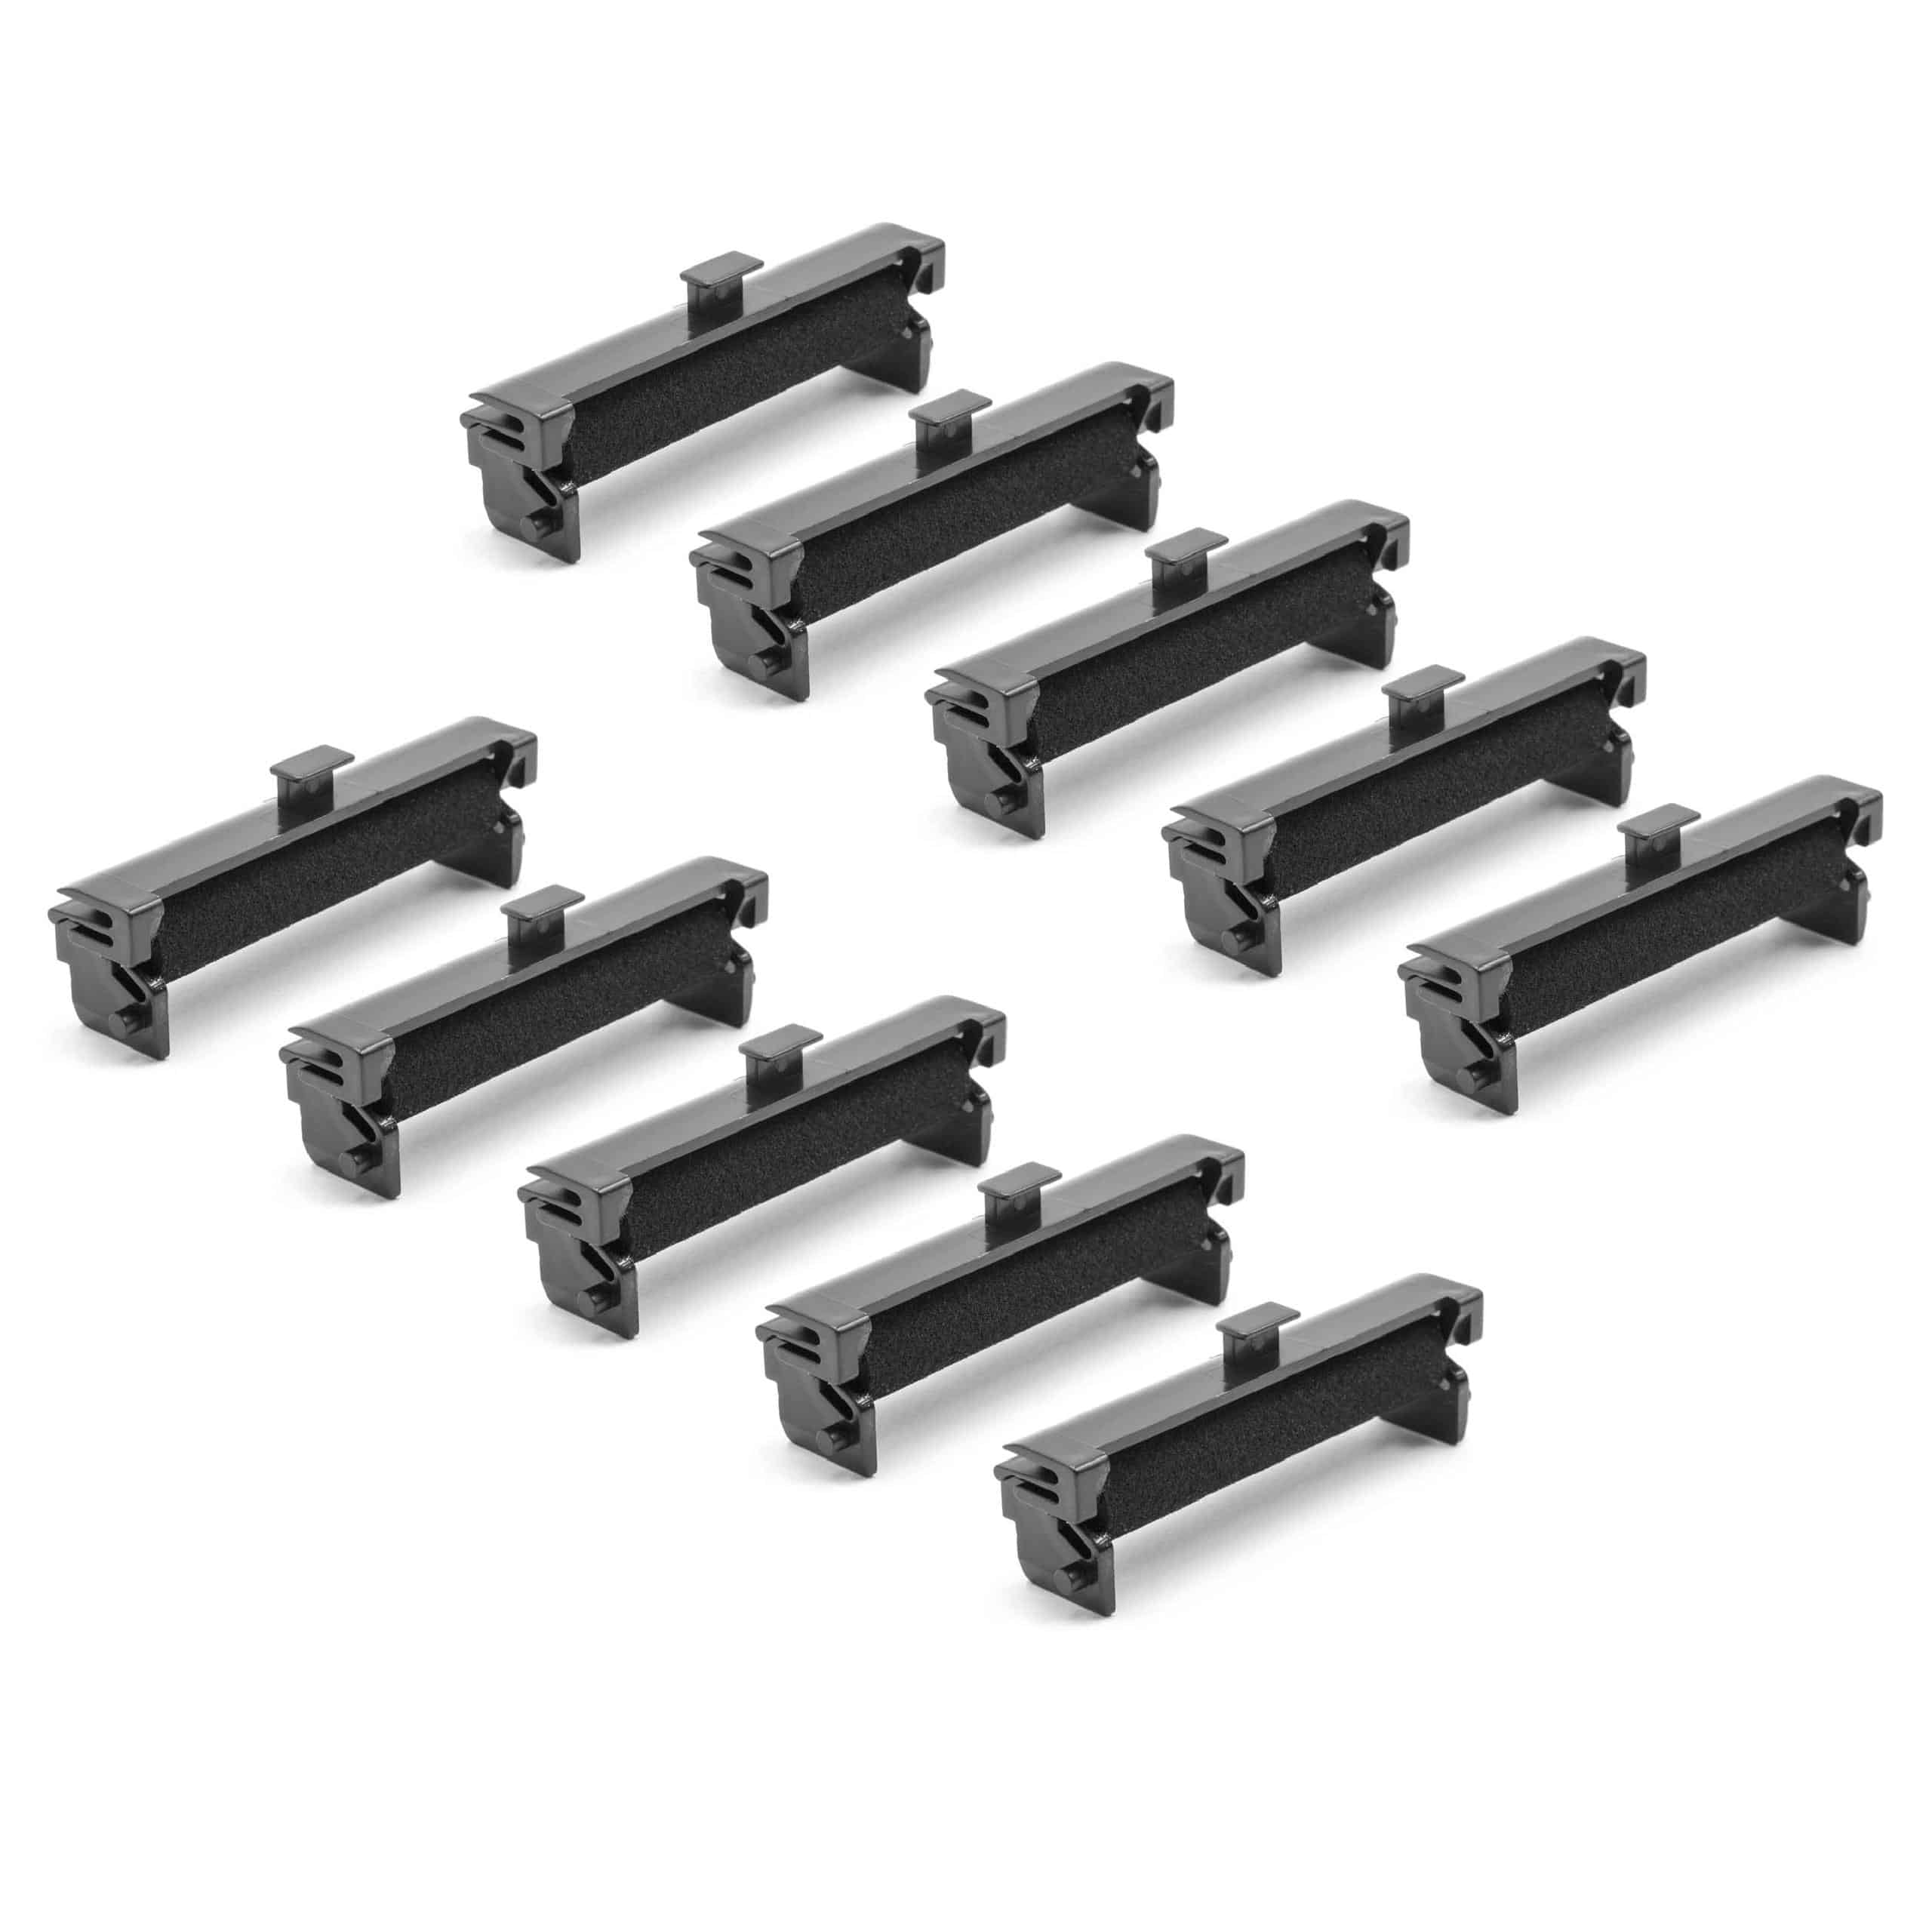 10x ink roller replaces GR 728, IR74 for Toshibacash register, calculator